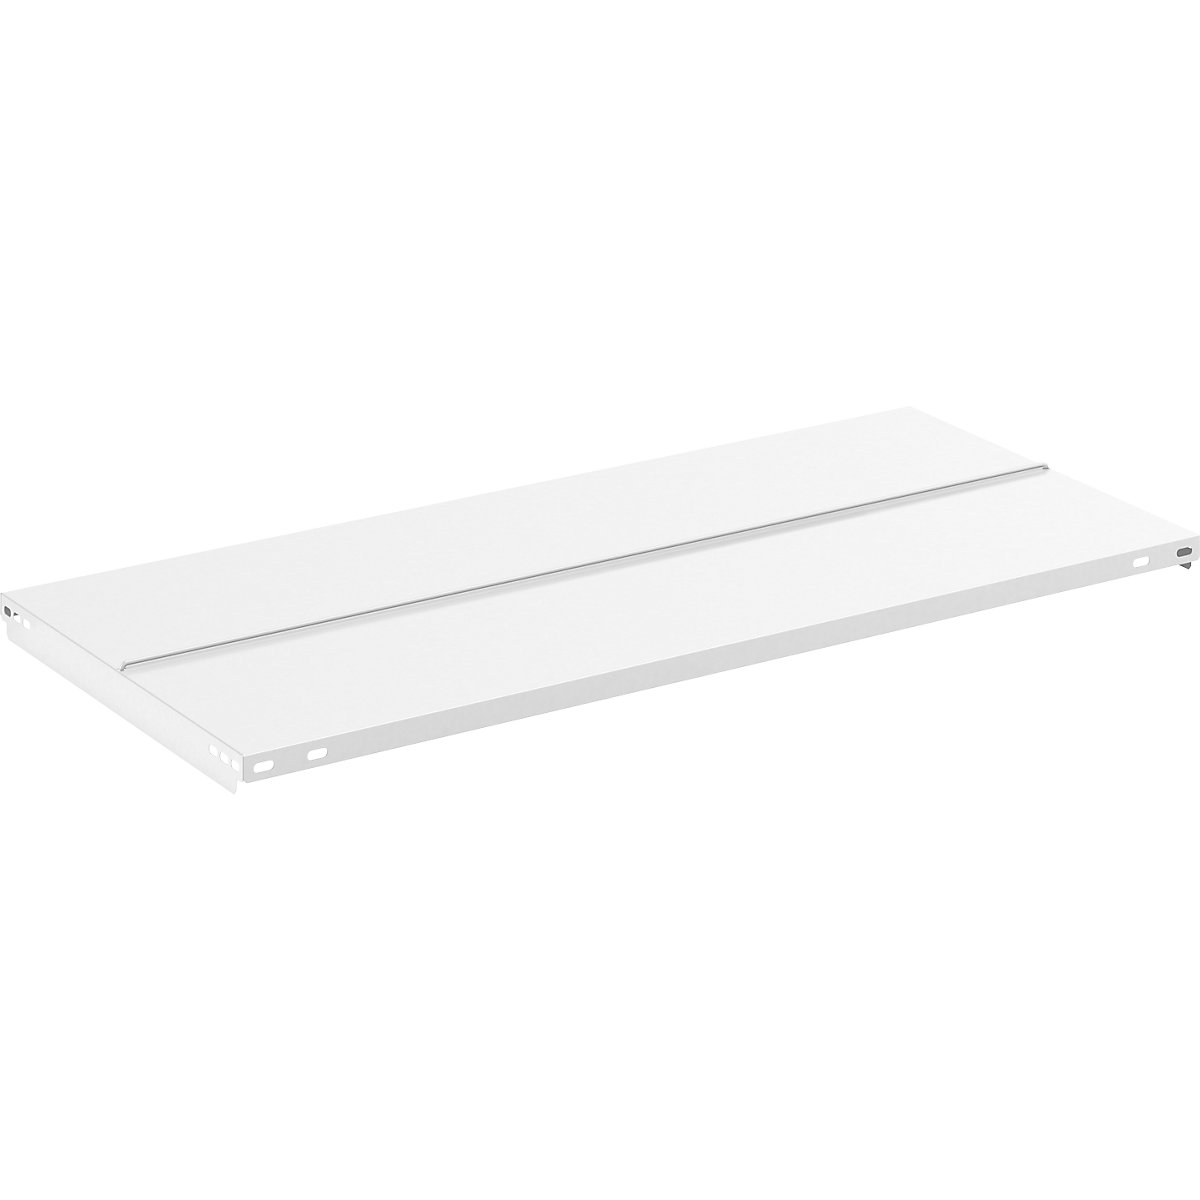 Shelf with supports – hofe, zinc plated and plastic coated, WxD 1000 x 600 mm